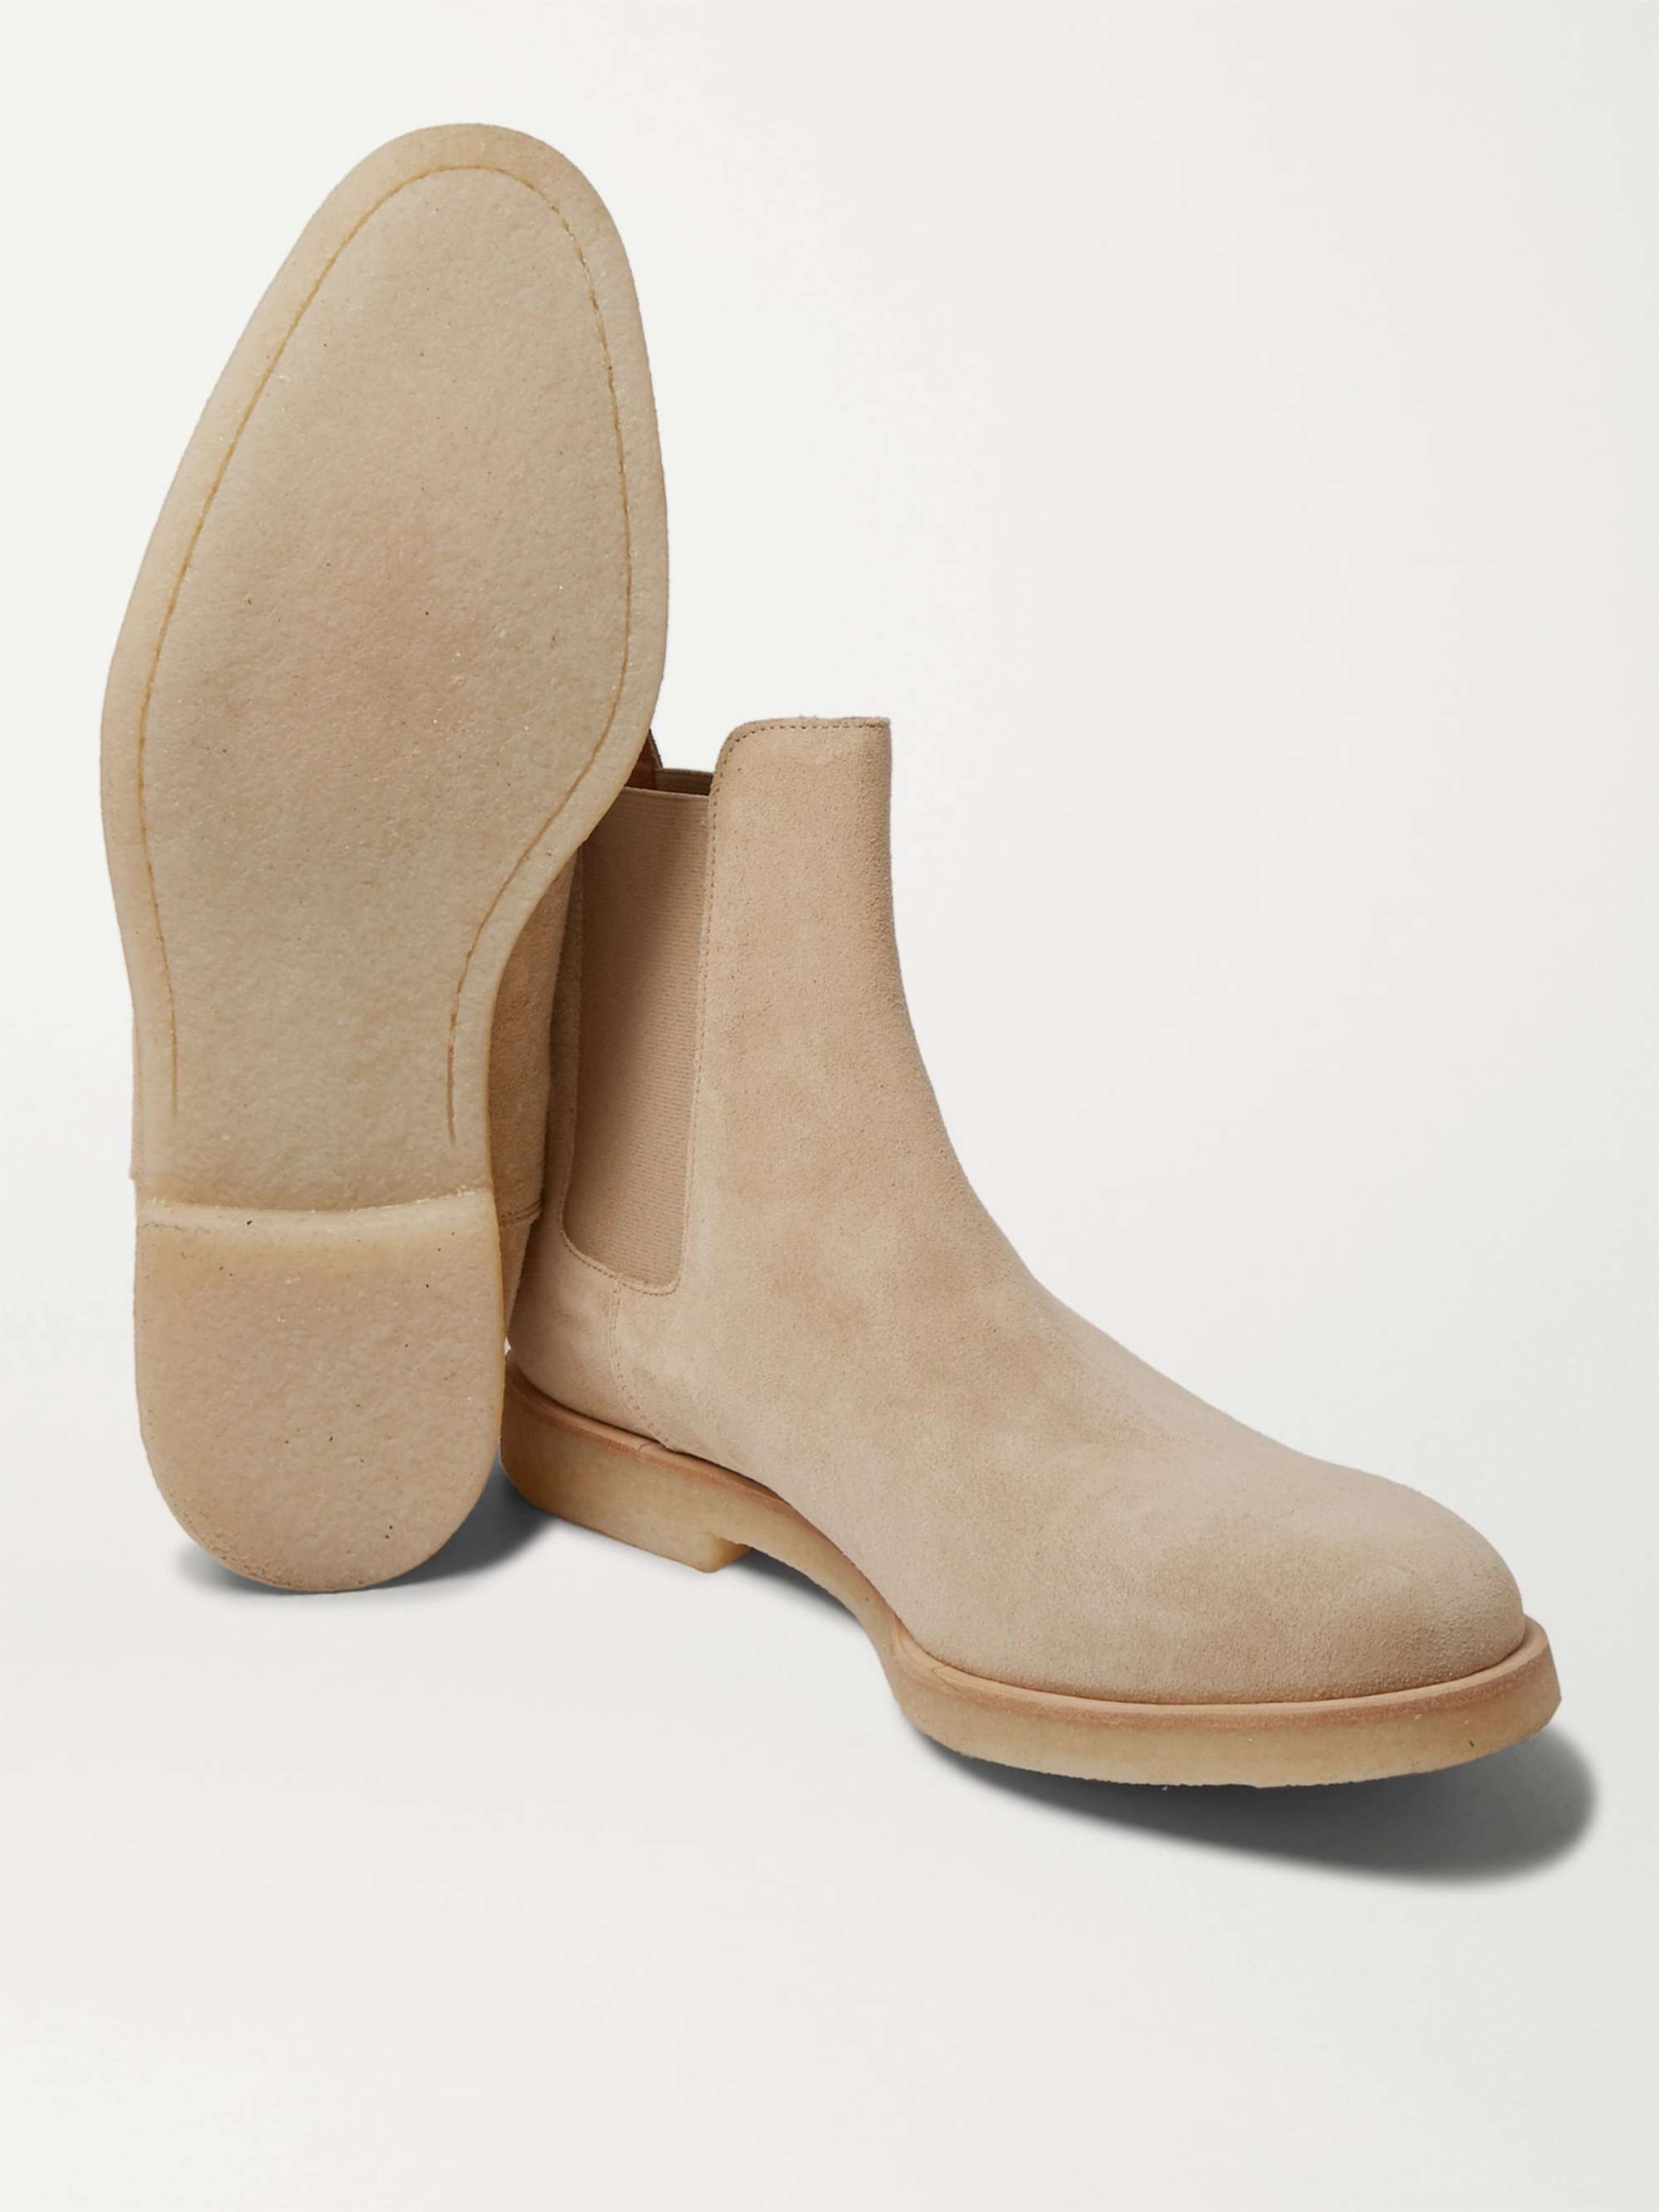 COMMON PROJECTS Suede Boots Men | PORTER